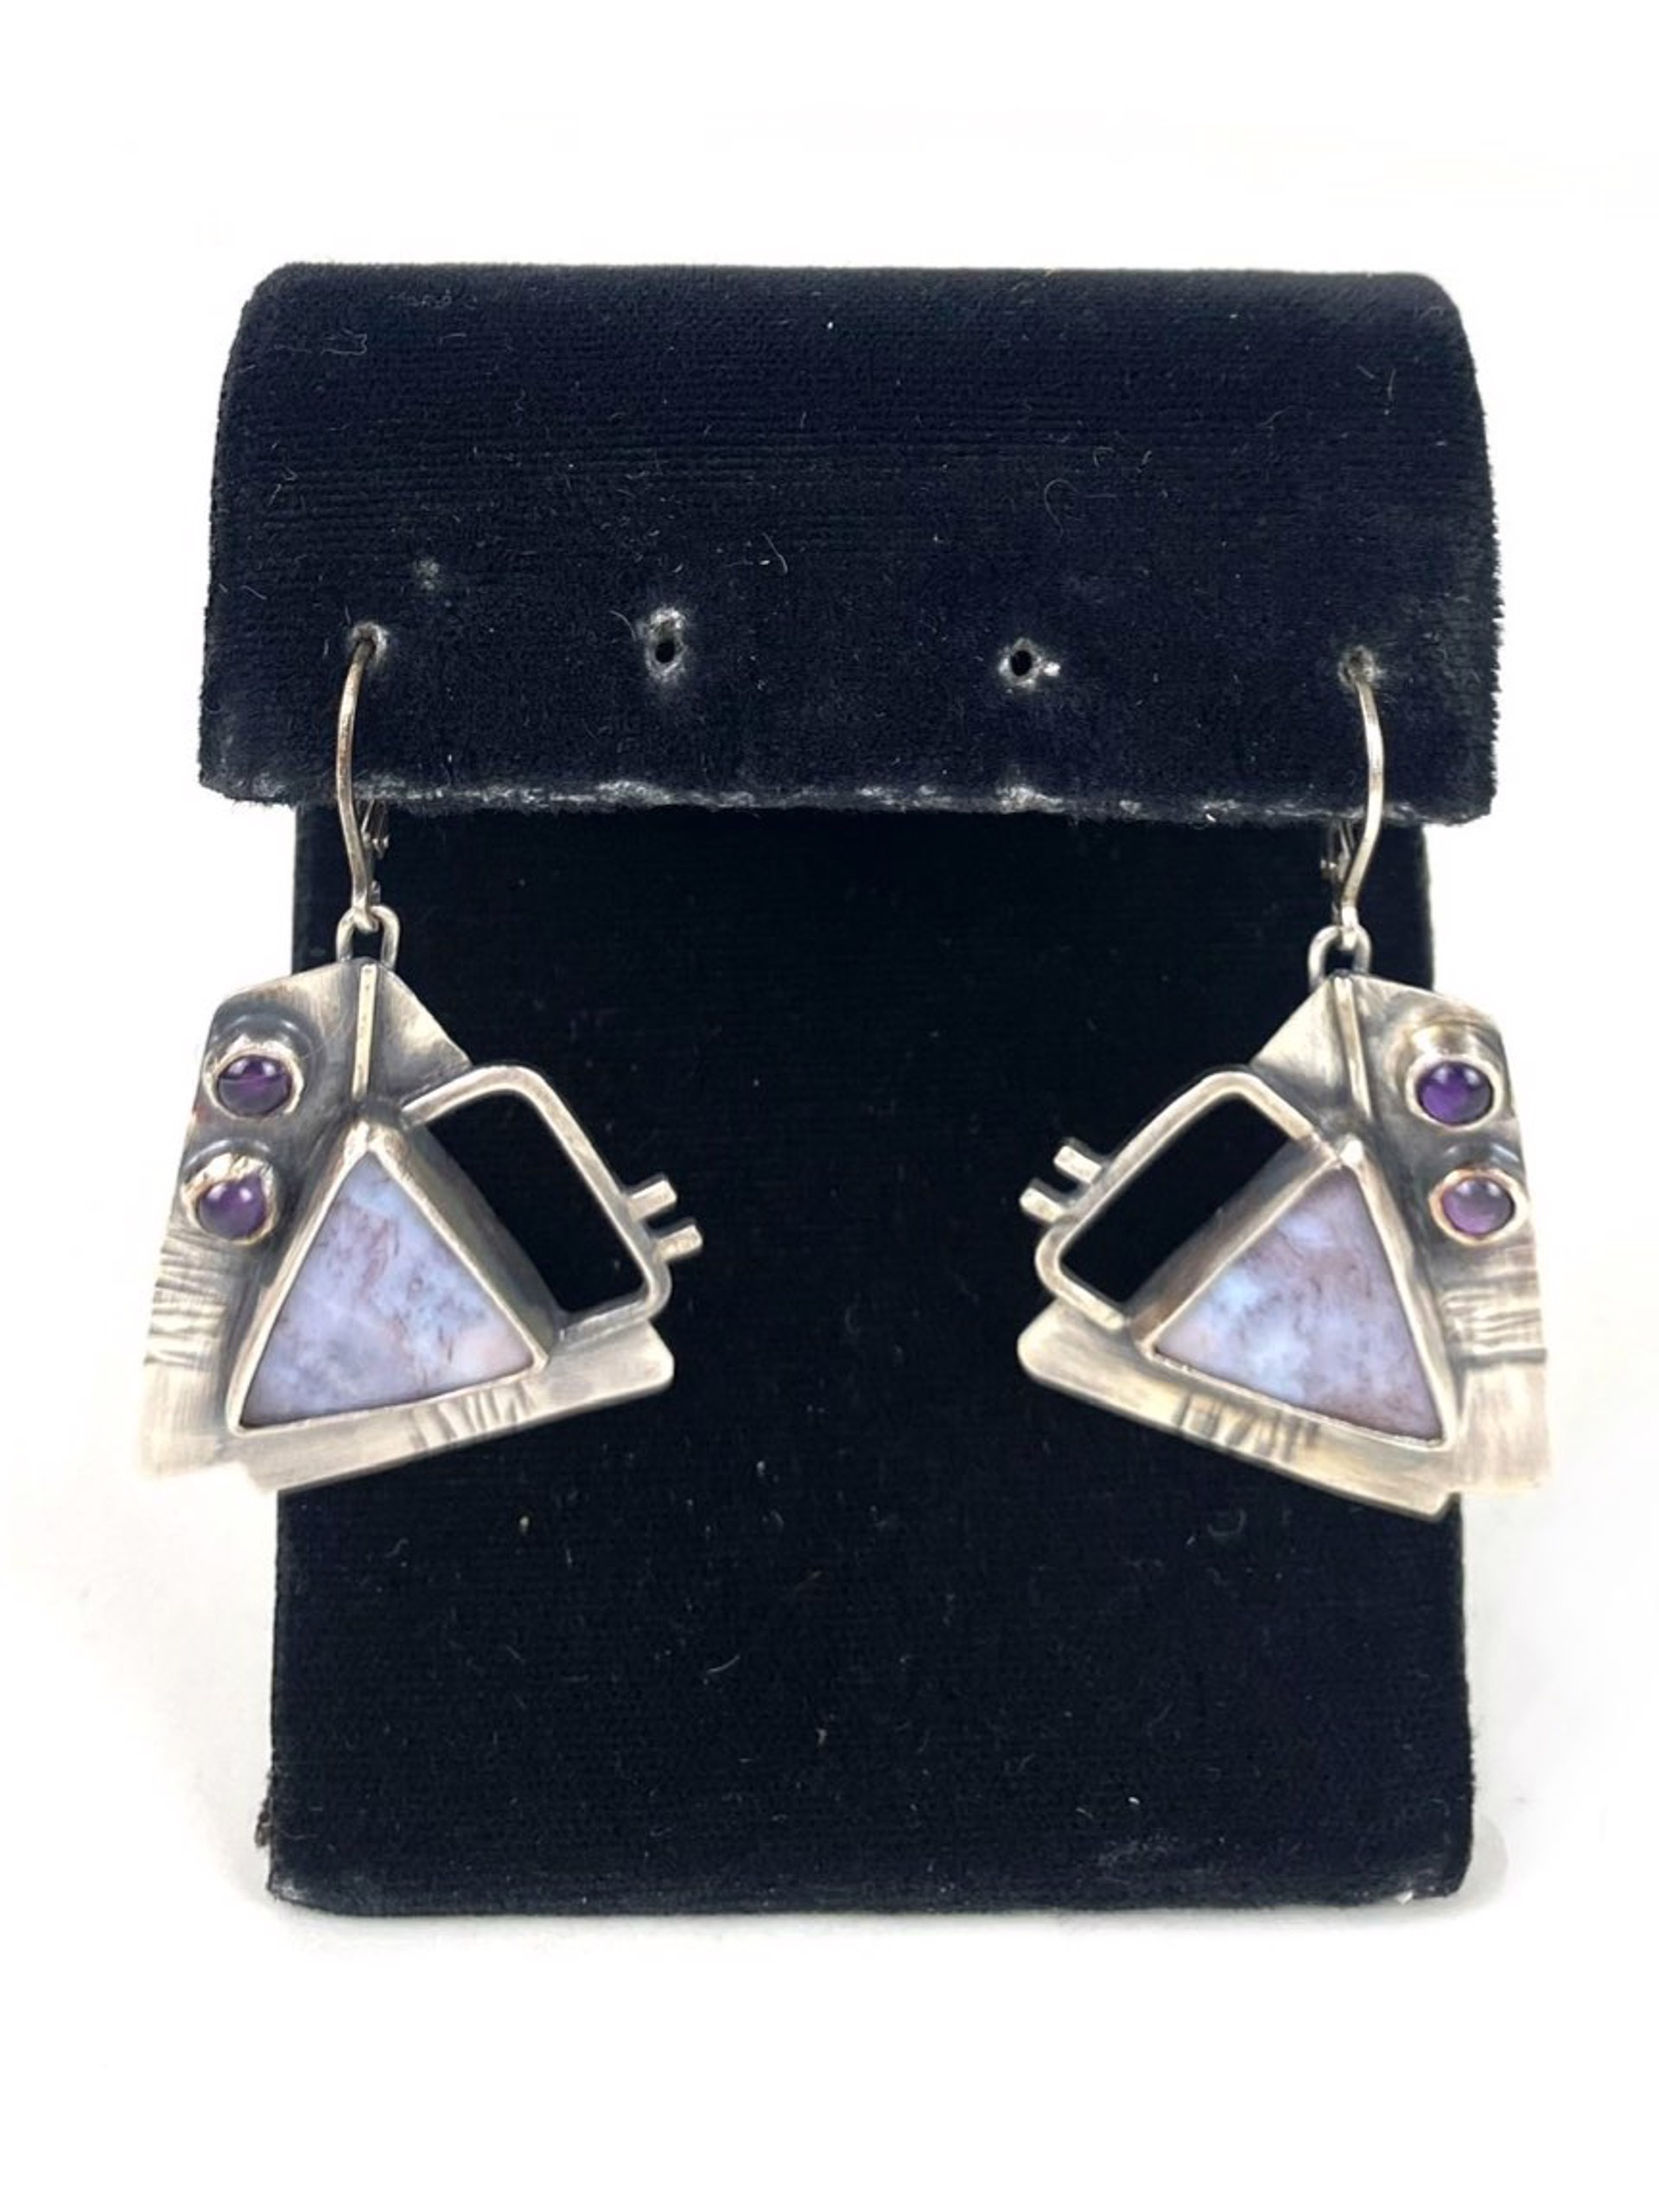 Agate, Amethyst and Sterling Silver Earrings by Anne Rob